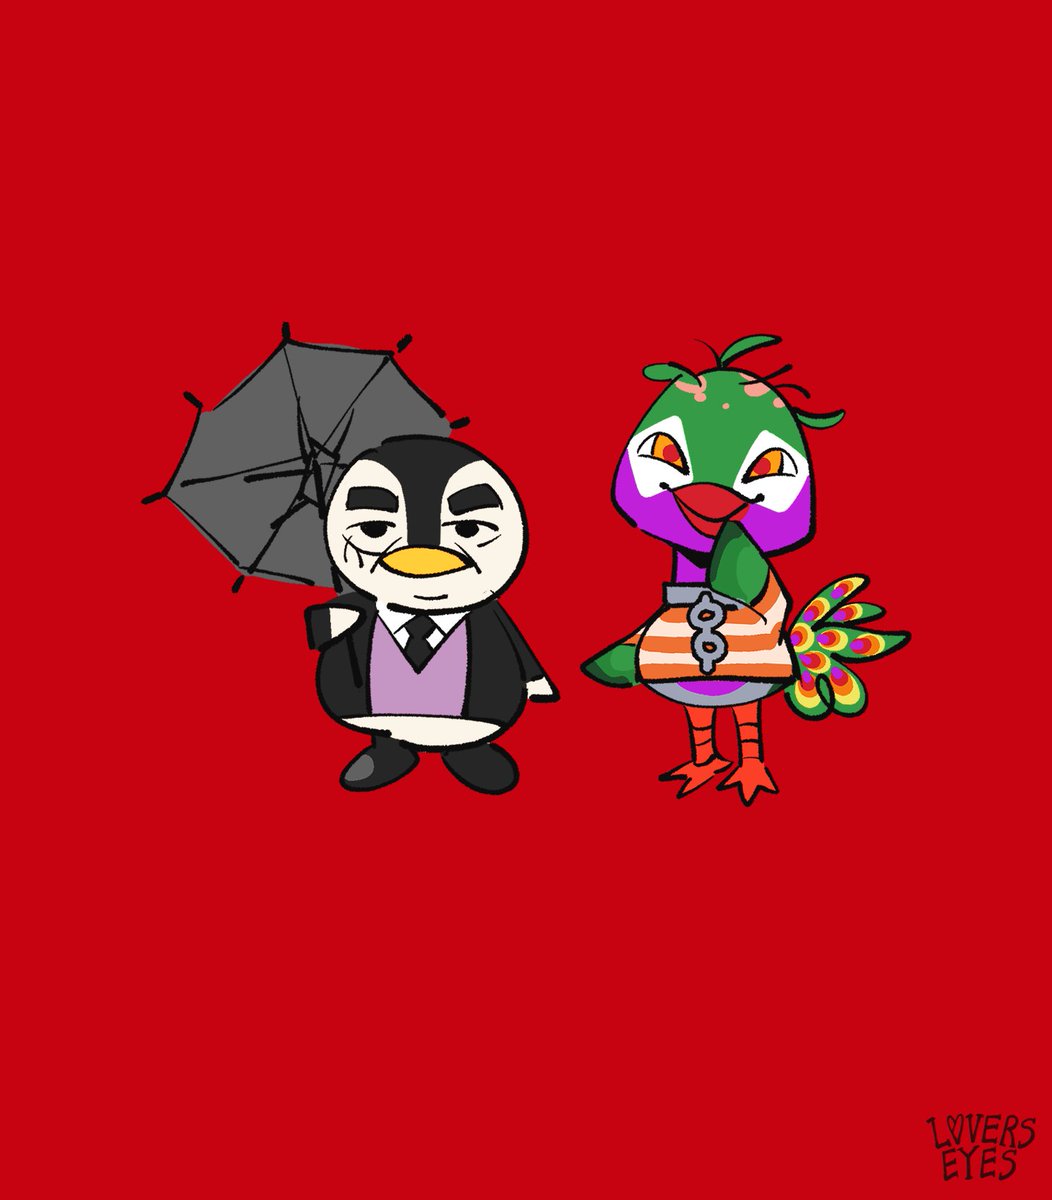 「+the penguin and the joker 」|Krizzia ⭐️のイラスト